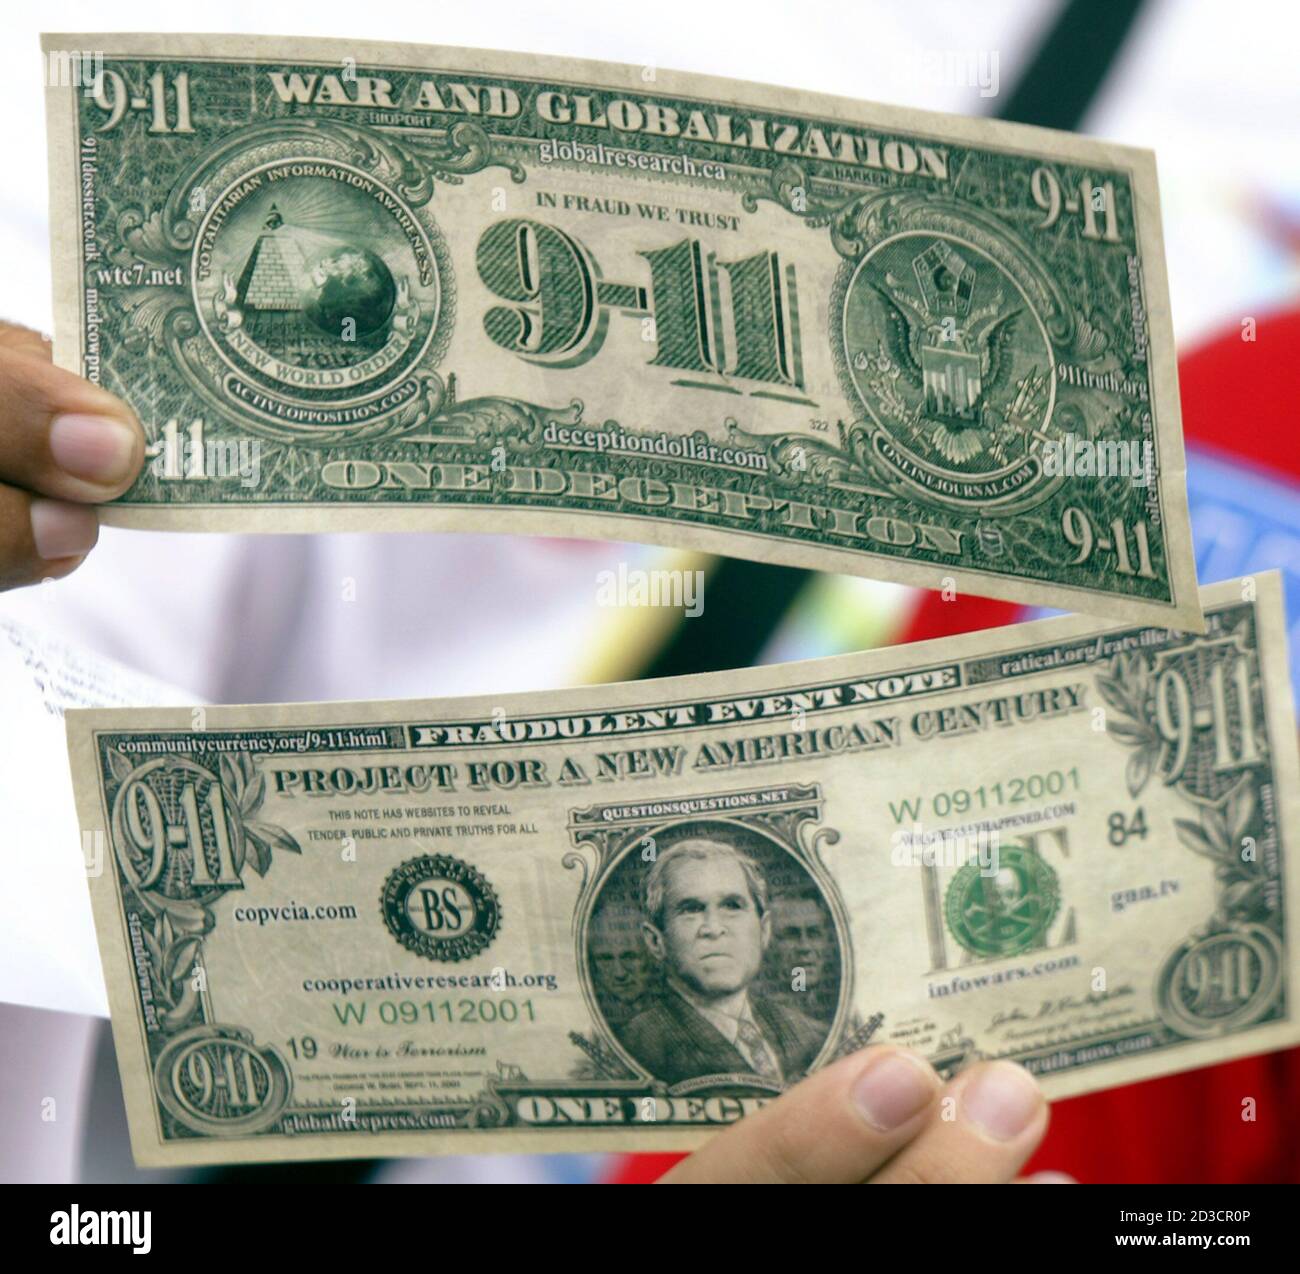 A Brazilian anti-war protester holds fake U.S. currency, modeled after the  dollar bill but showing an image of U.S. President George W. Bush and  referring to the September 11 attacks, during a